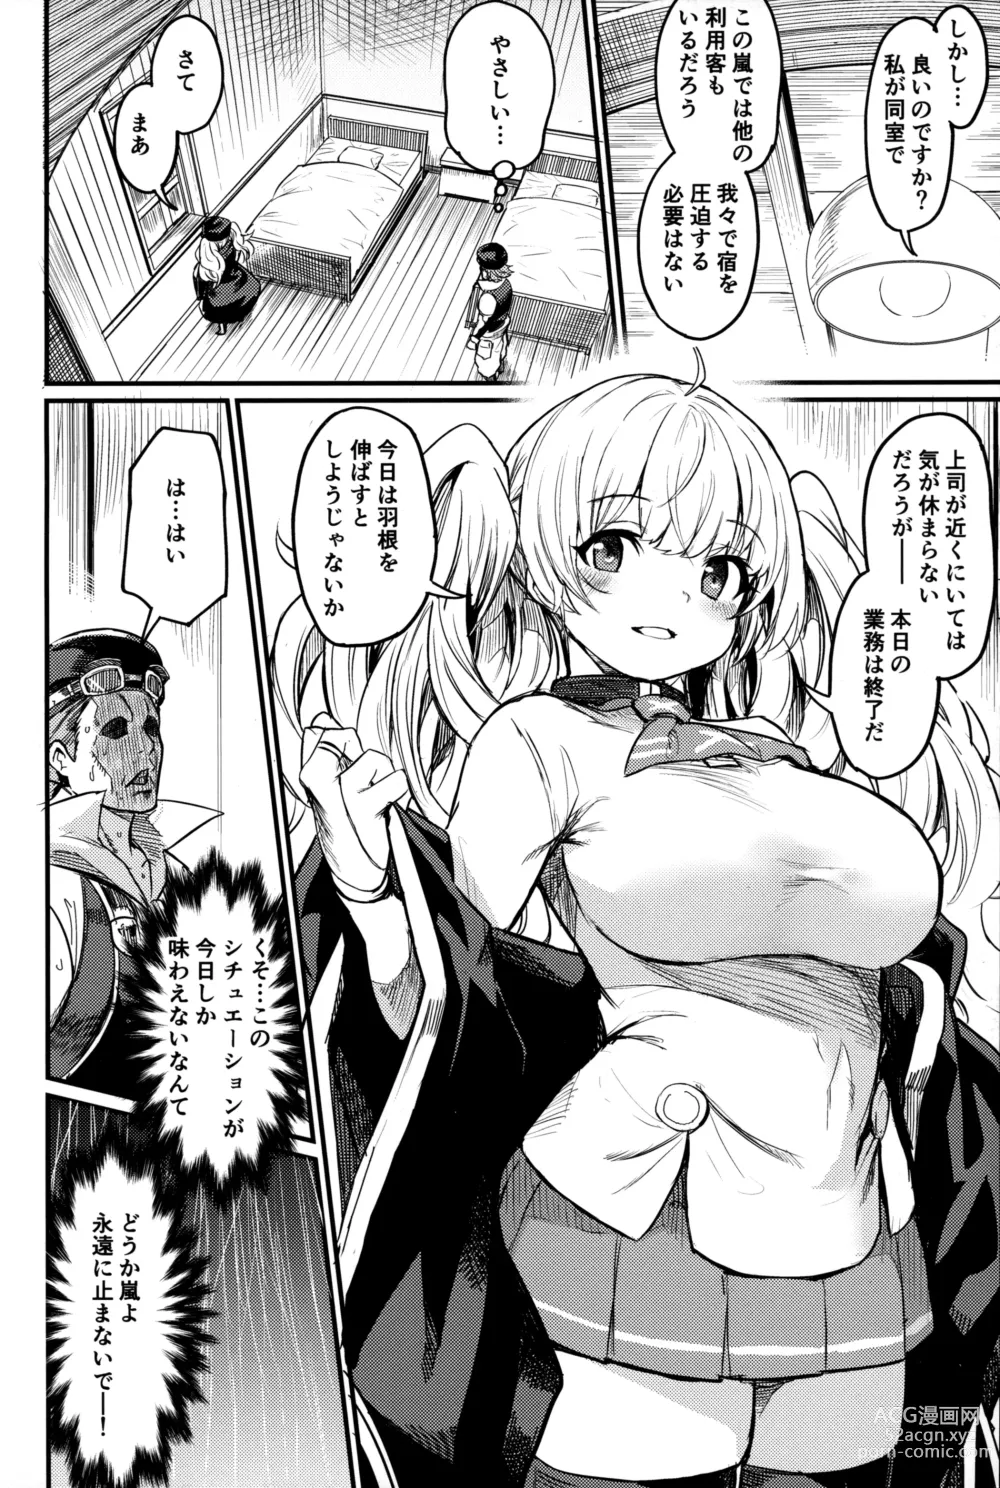 Page 3 of doujinshi Chitsujo Another